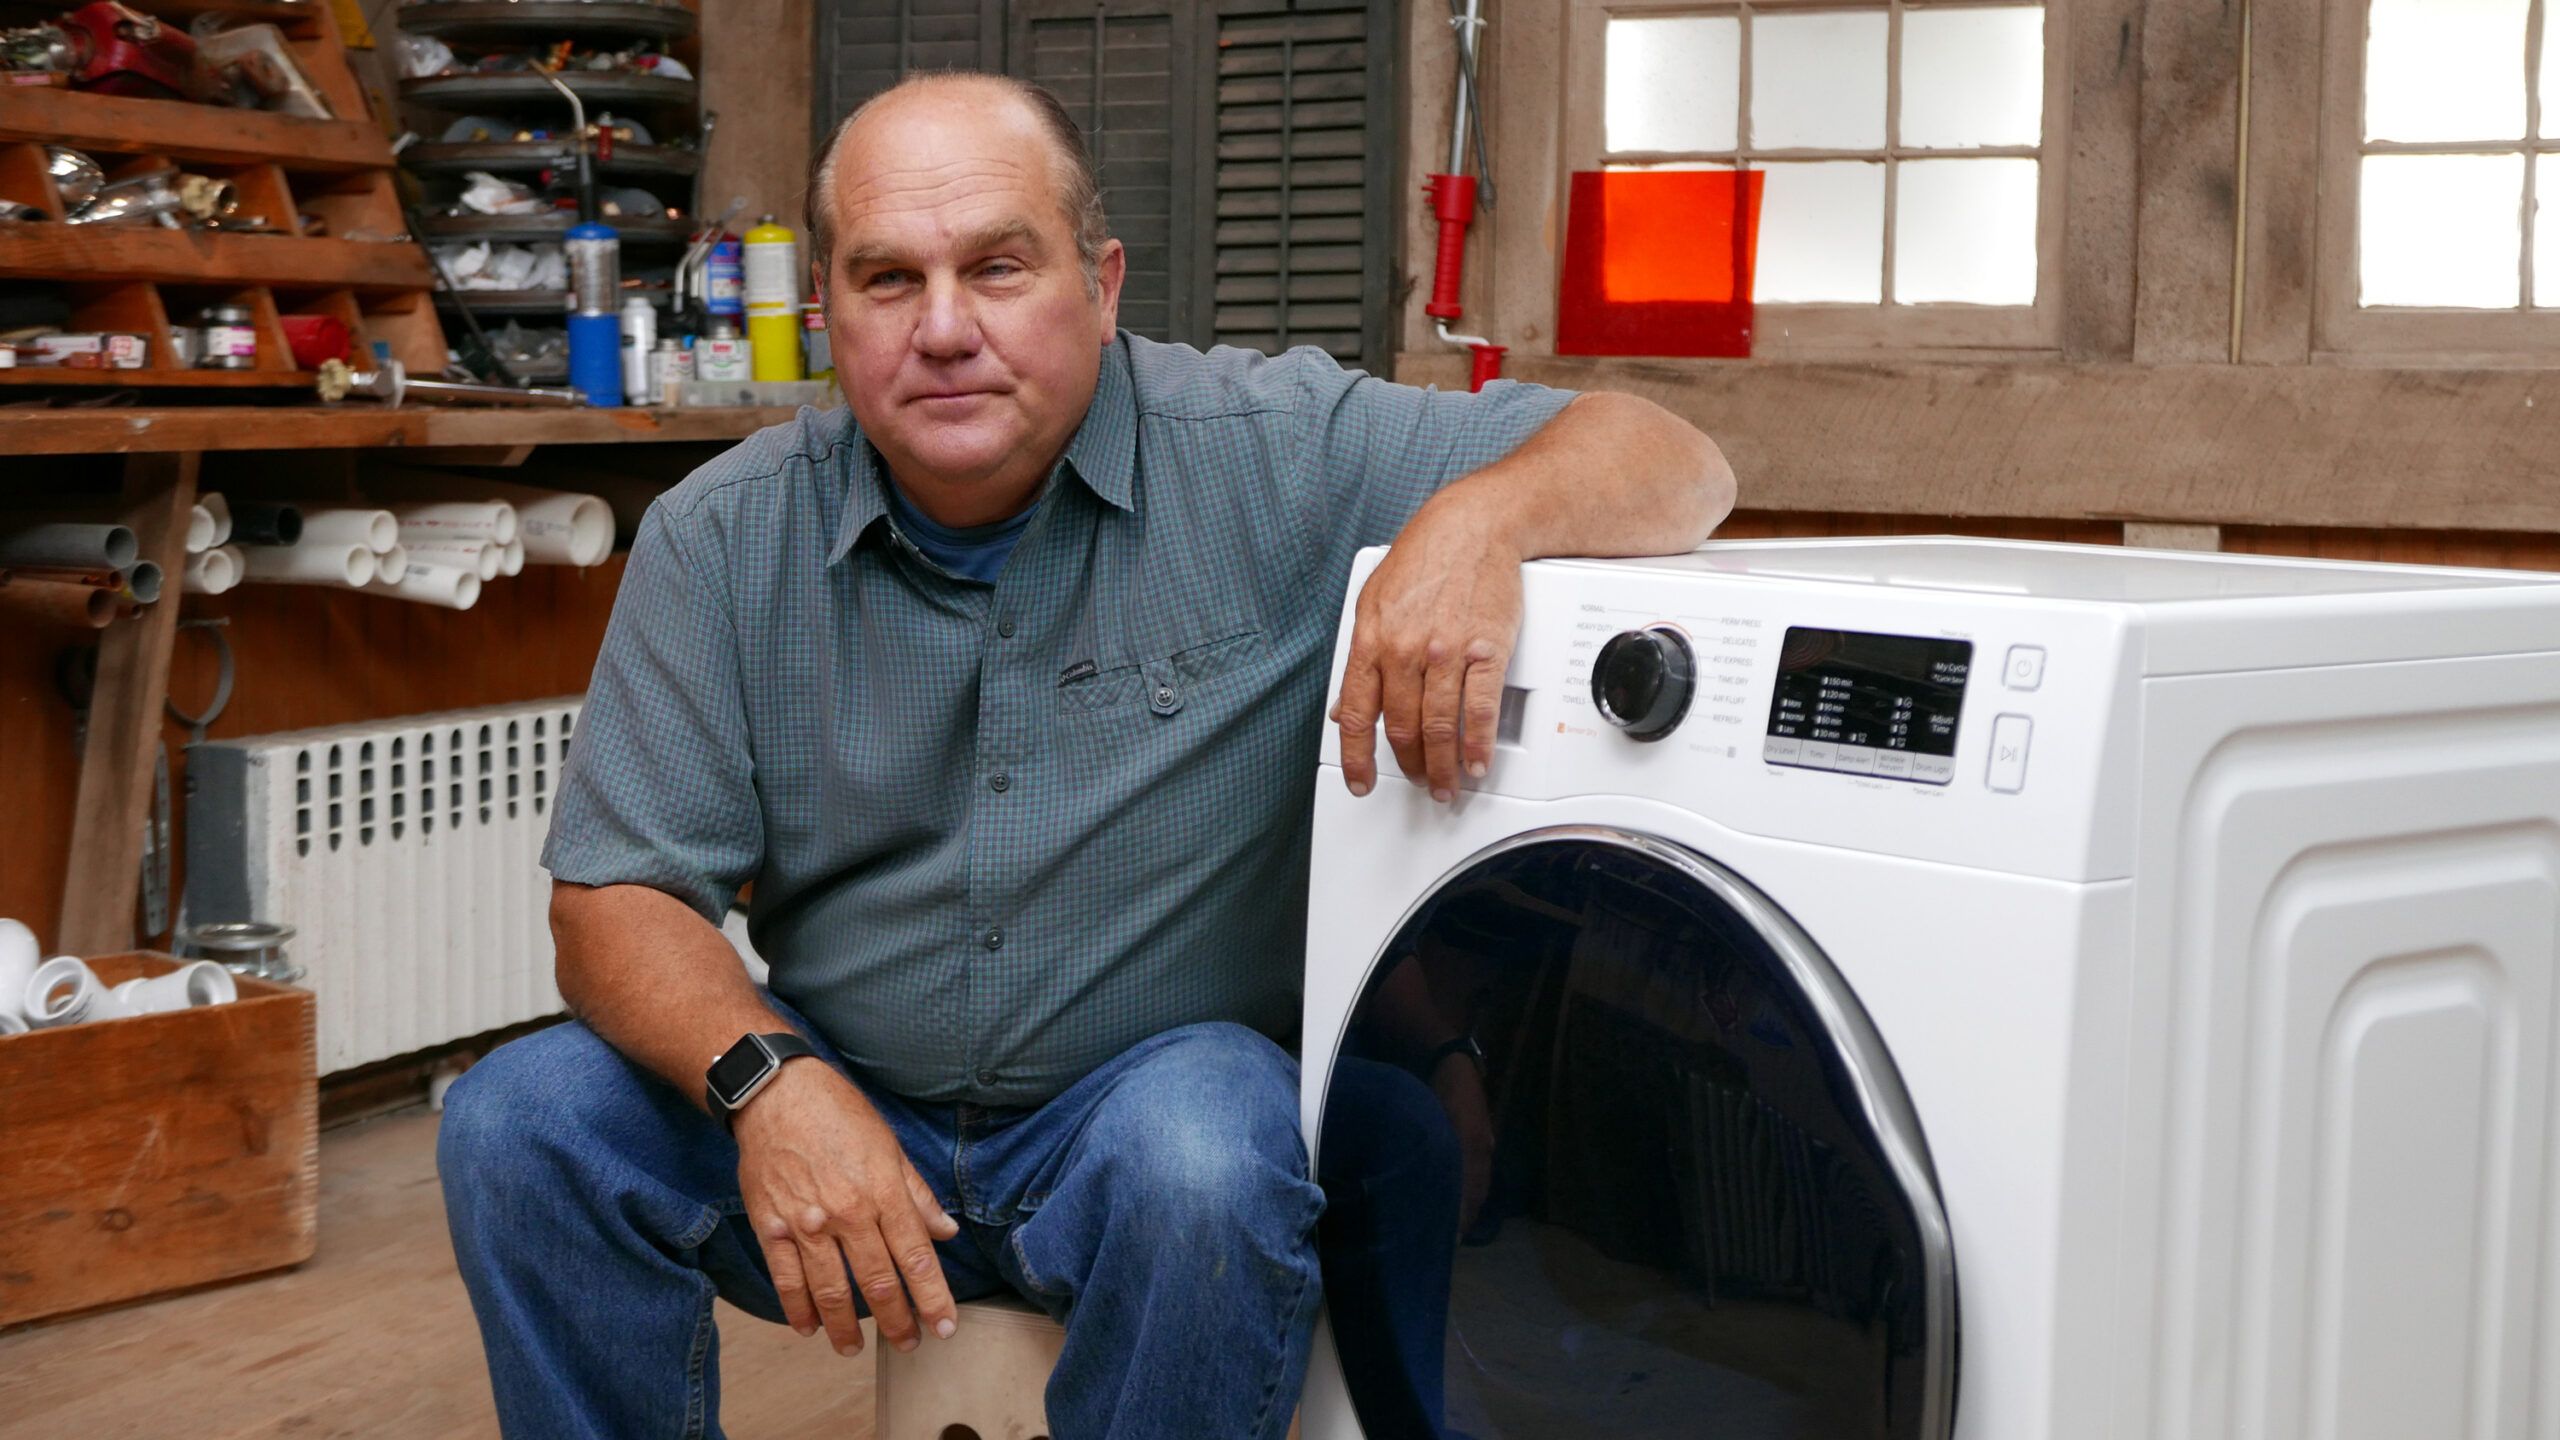 Dryers for Clothing & Laundry